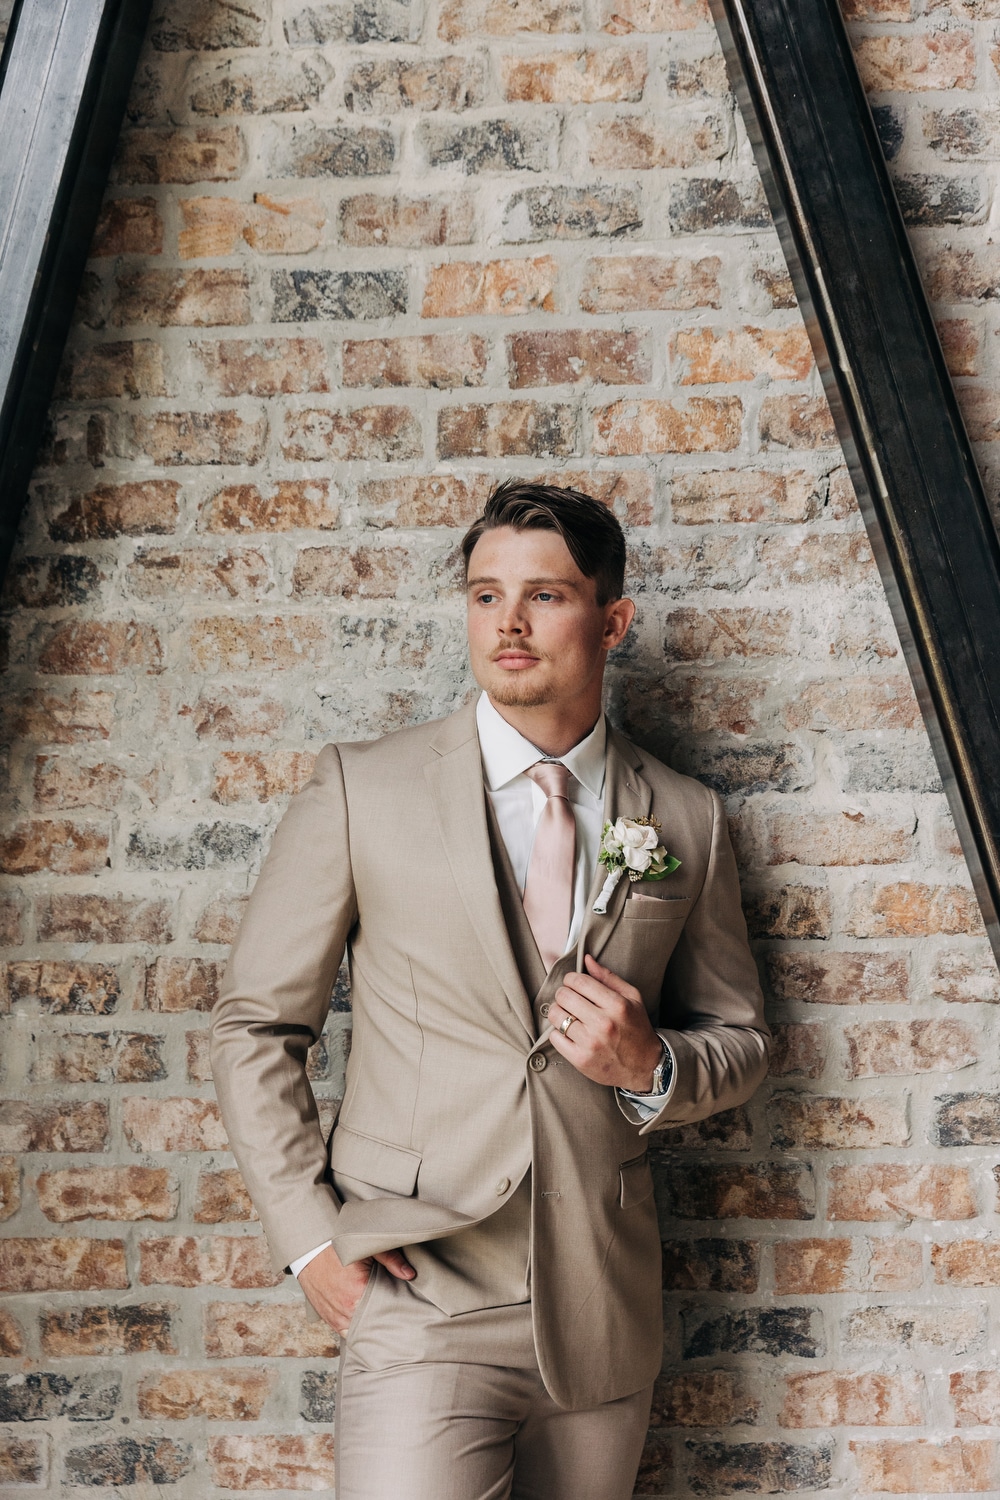 A man shows off his summer wedding suit for grooms while standing against a brick wall